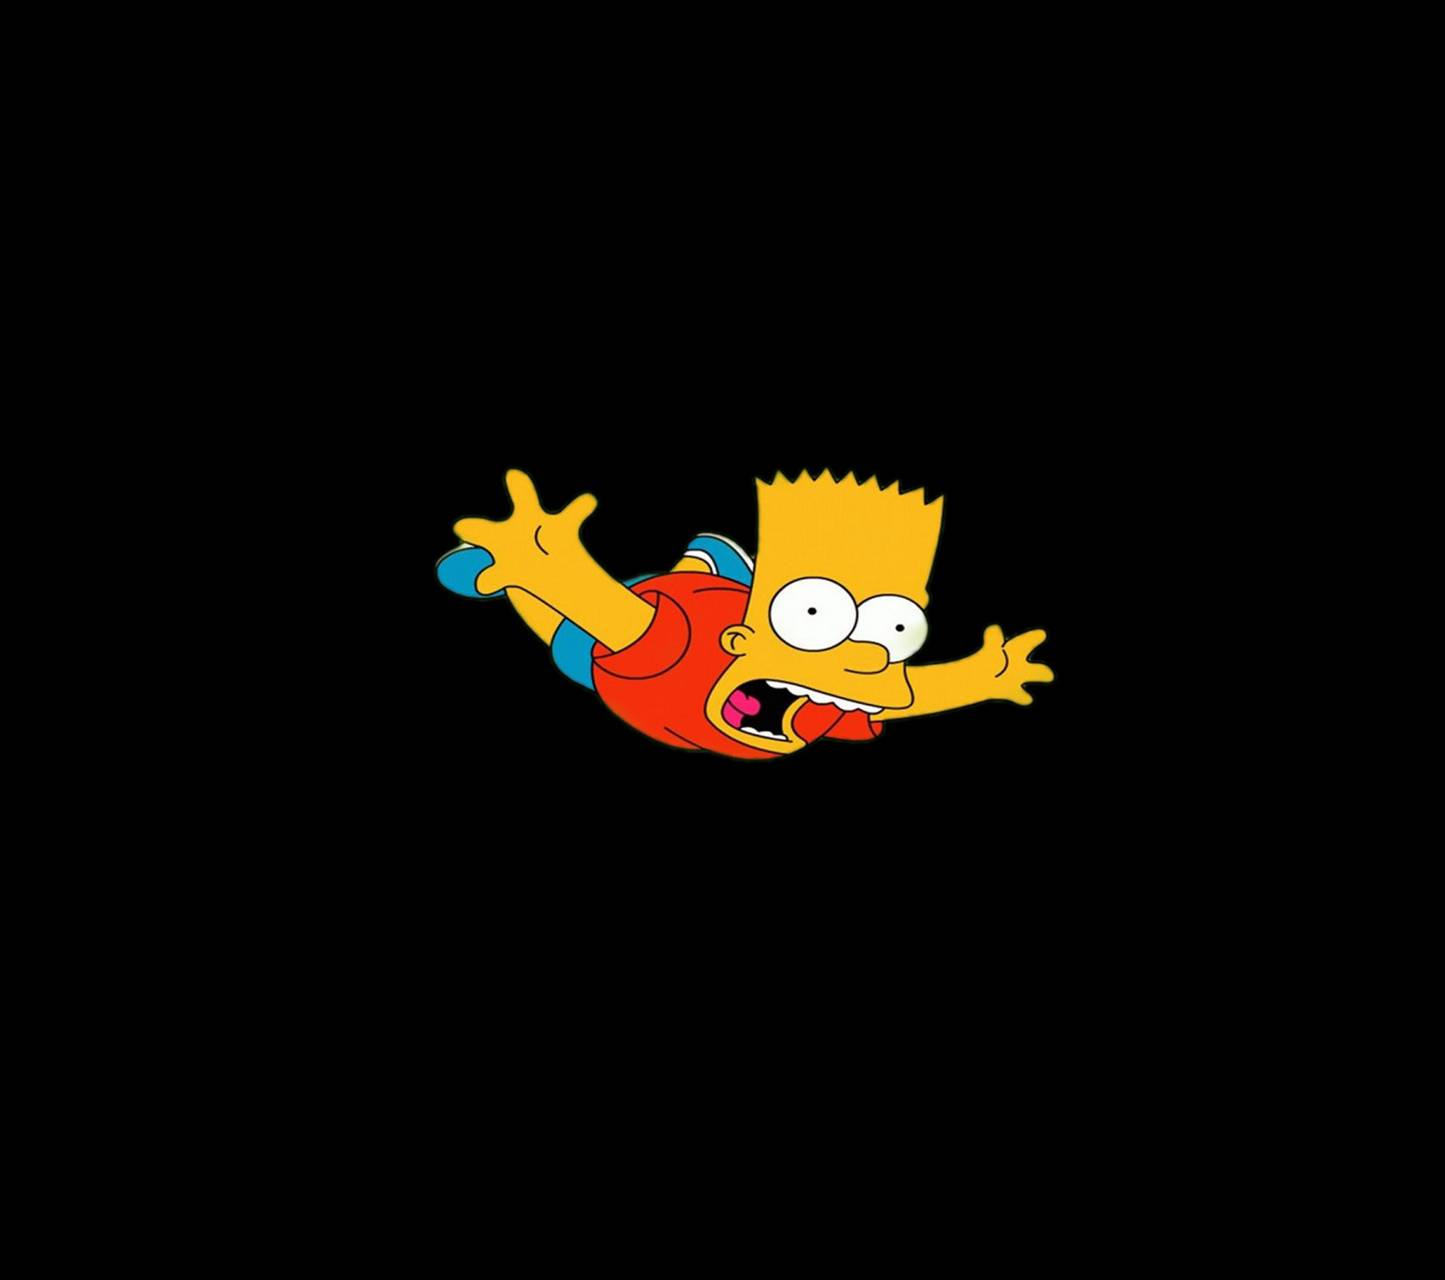 Download free bart simpson wallpaper for your mobile phone